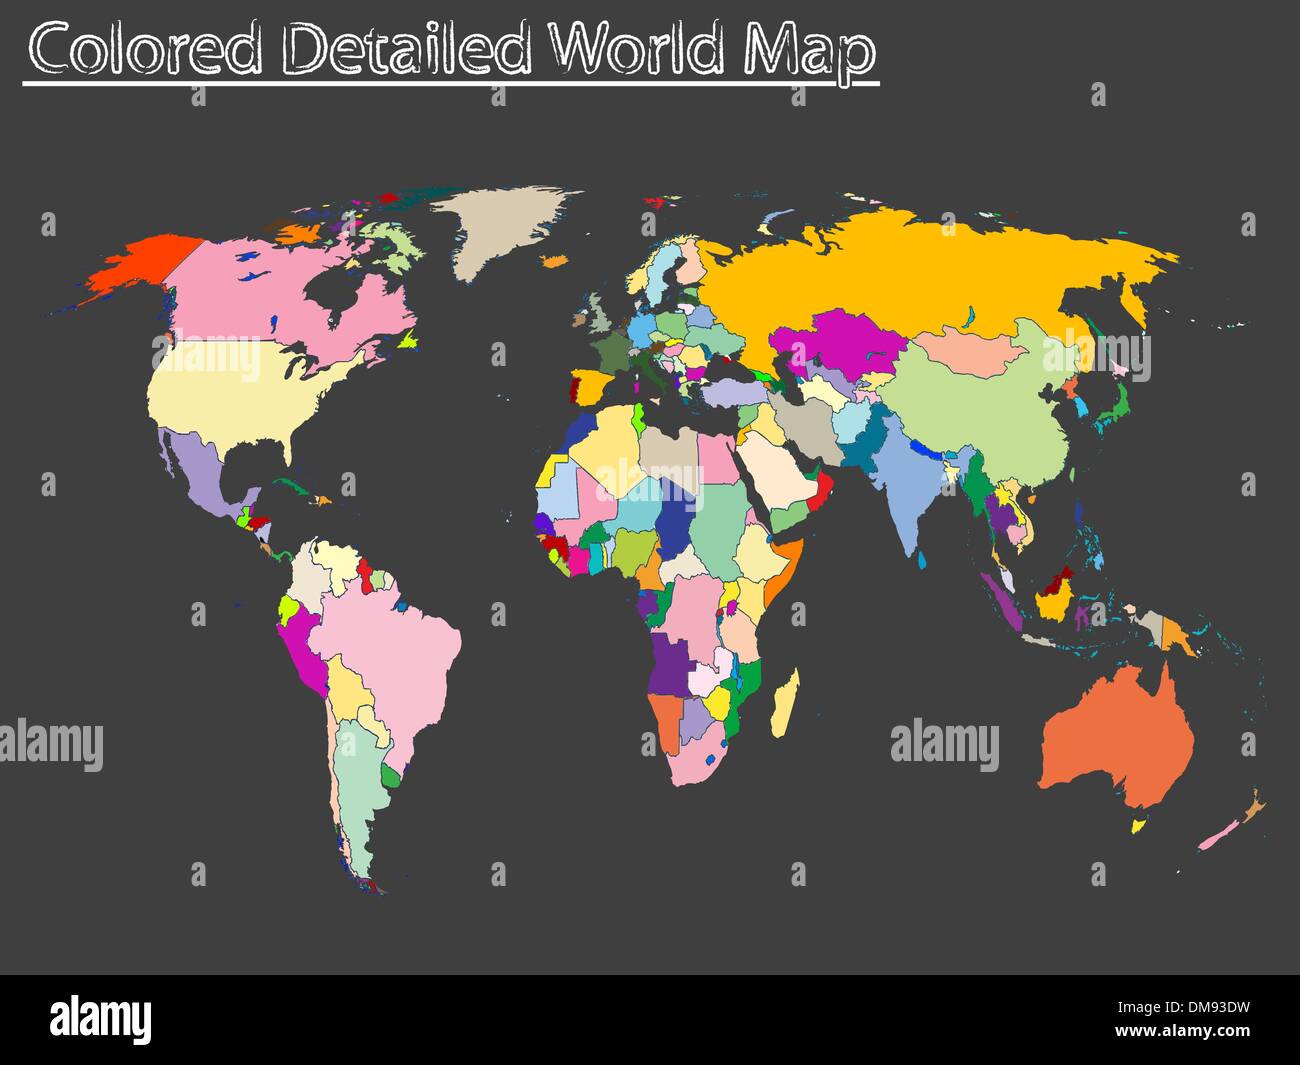 colored detailed world map Stock Vector